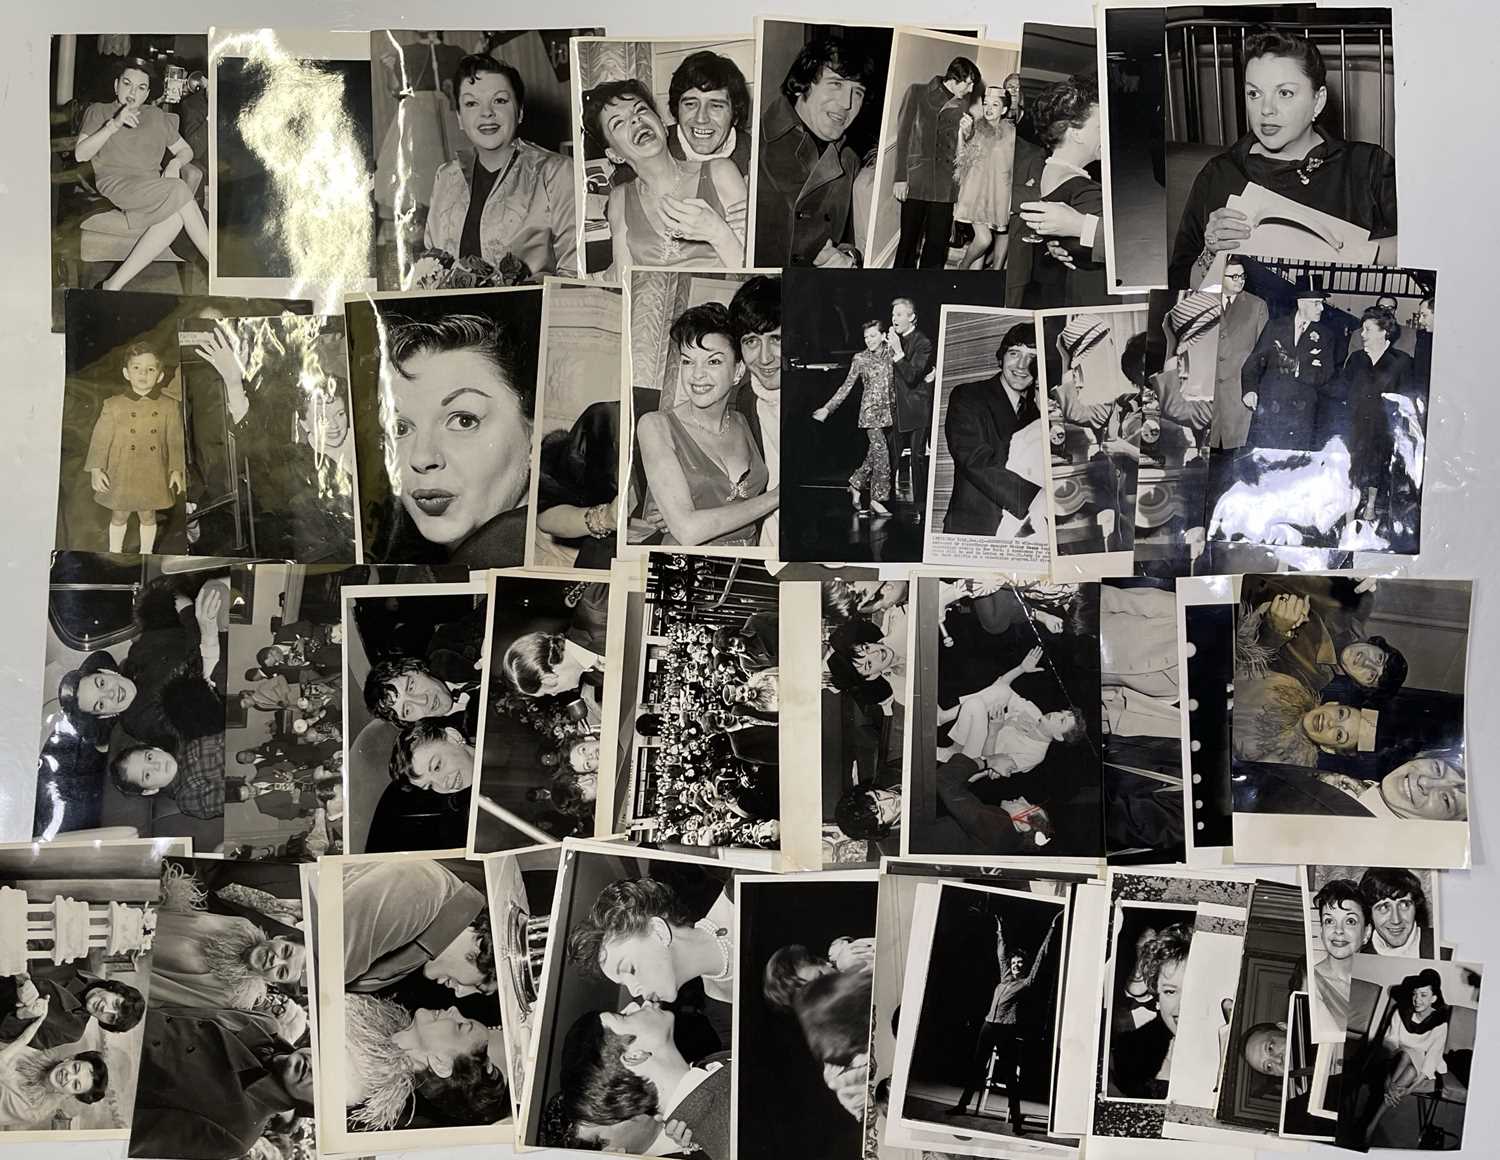 JUDY GARLAND - LARGE COLLECTION OF PRESS PHOTOGRAPHS.